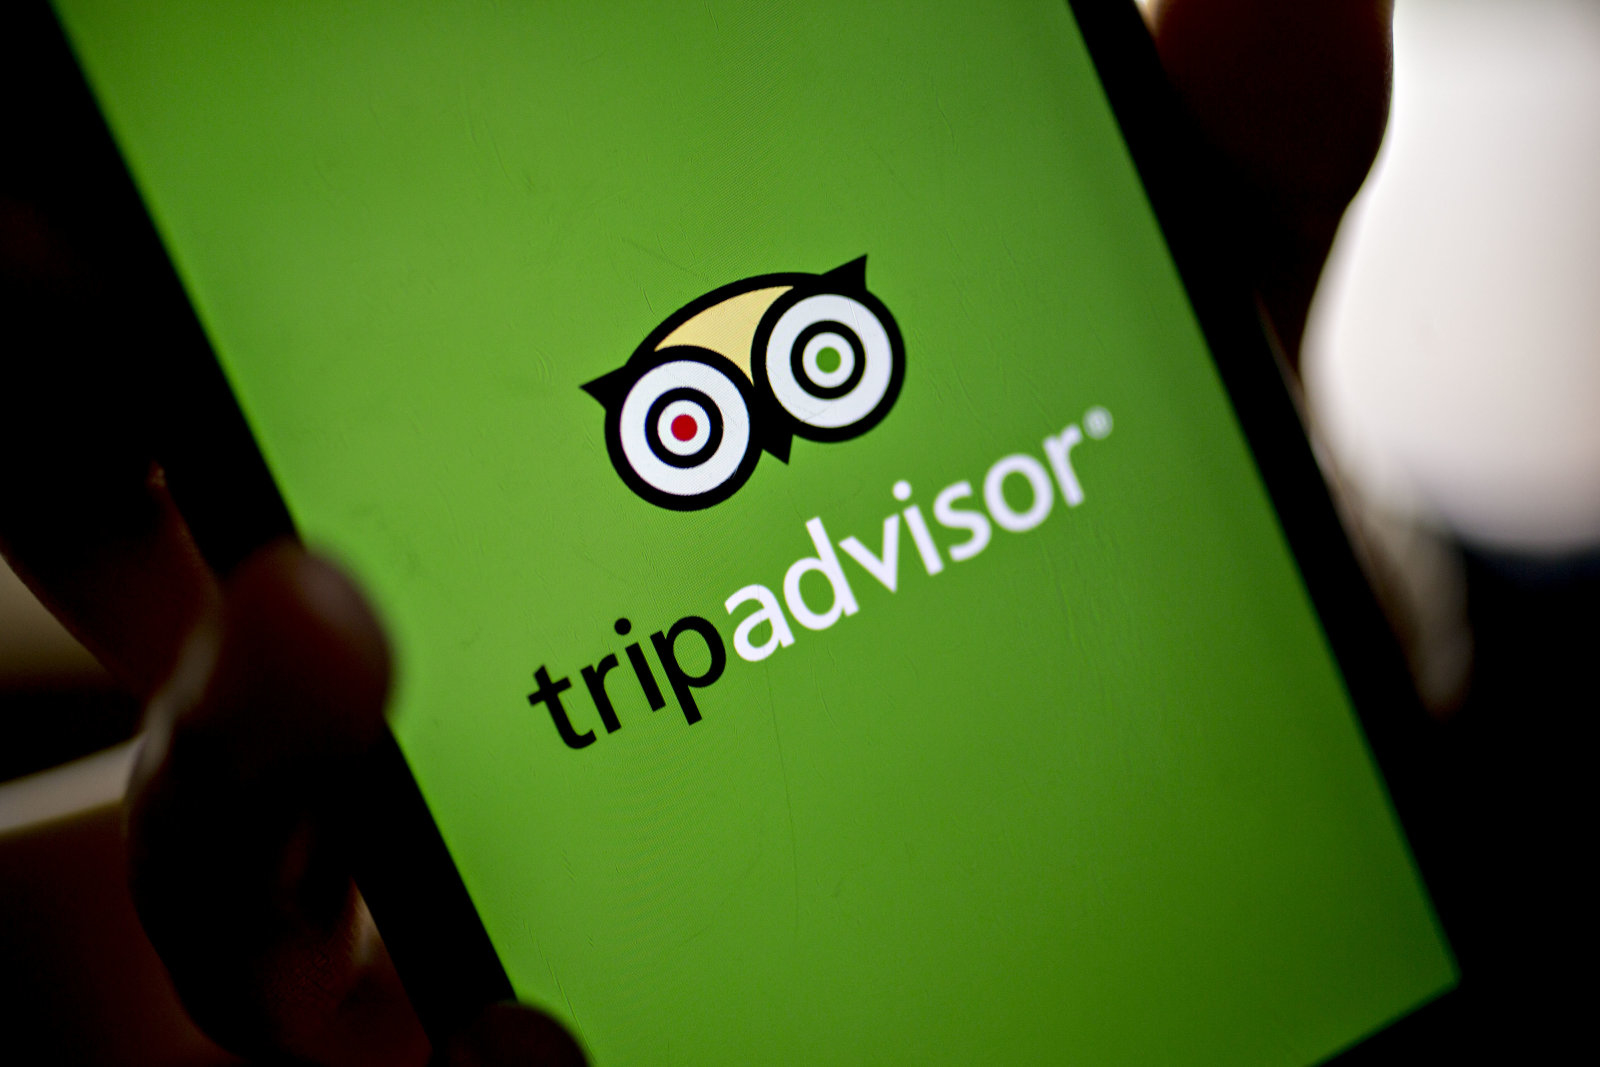 Why an investigation started by FTC against TripAdvisor?